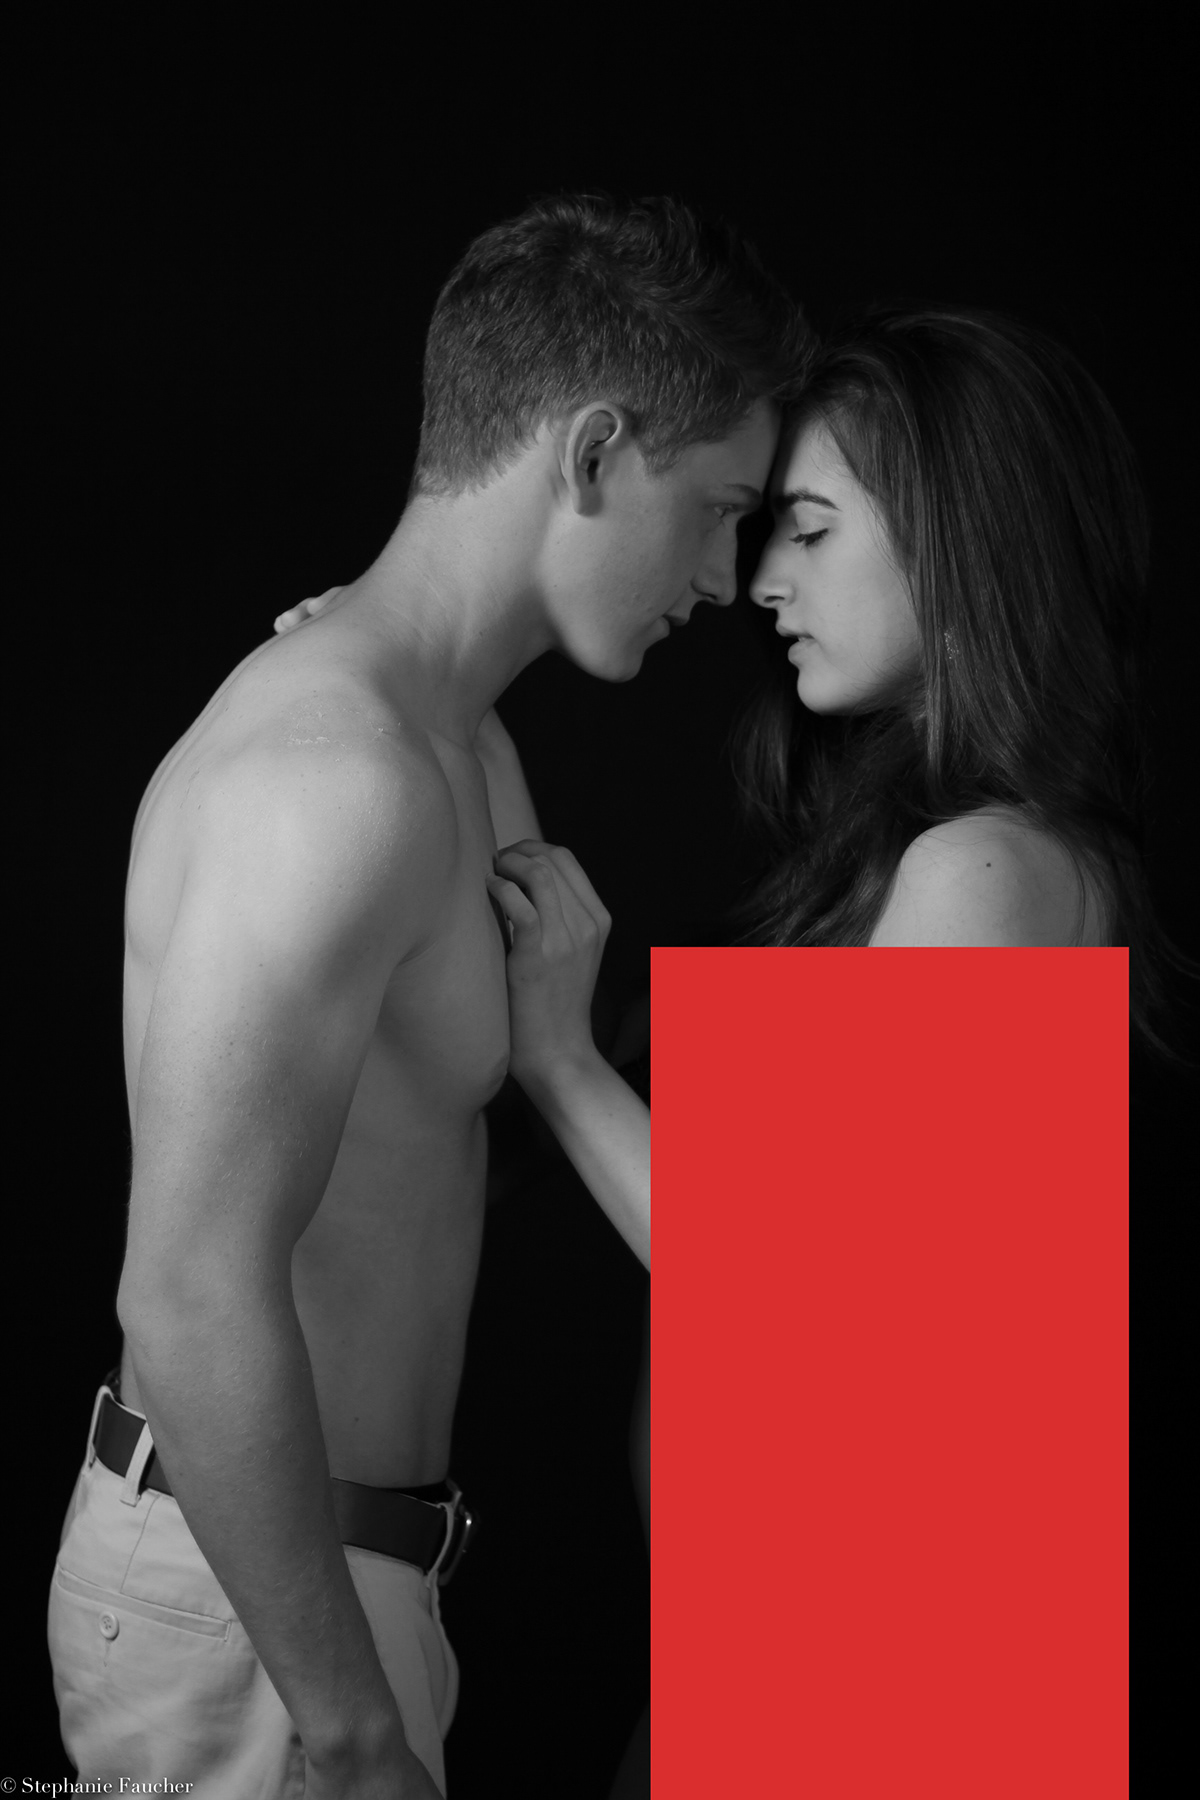 couple Censorship Blocked Lines cover up Sensuality black & white blurred lines